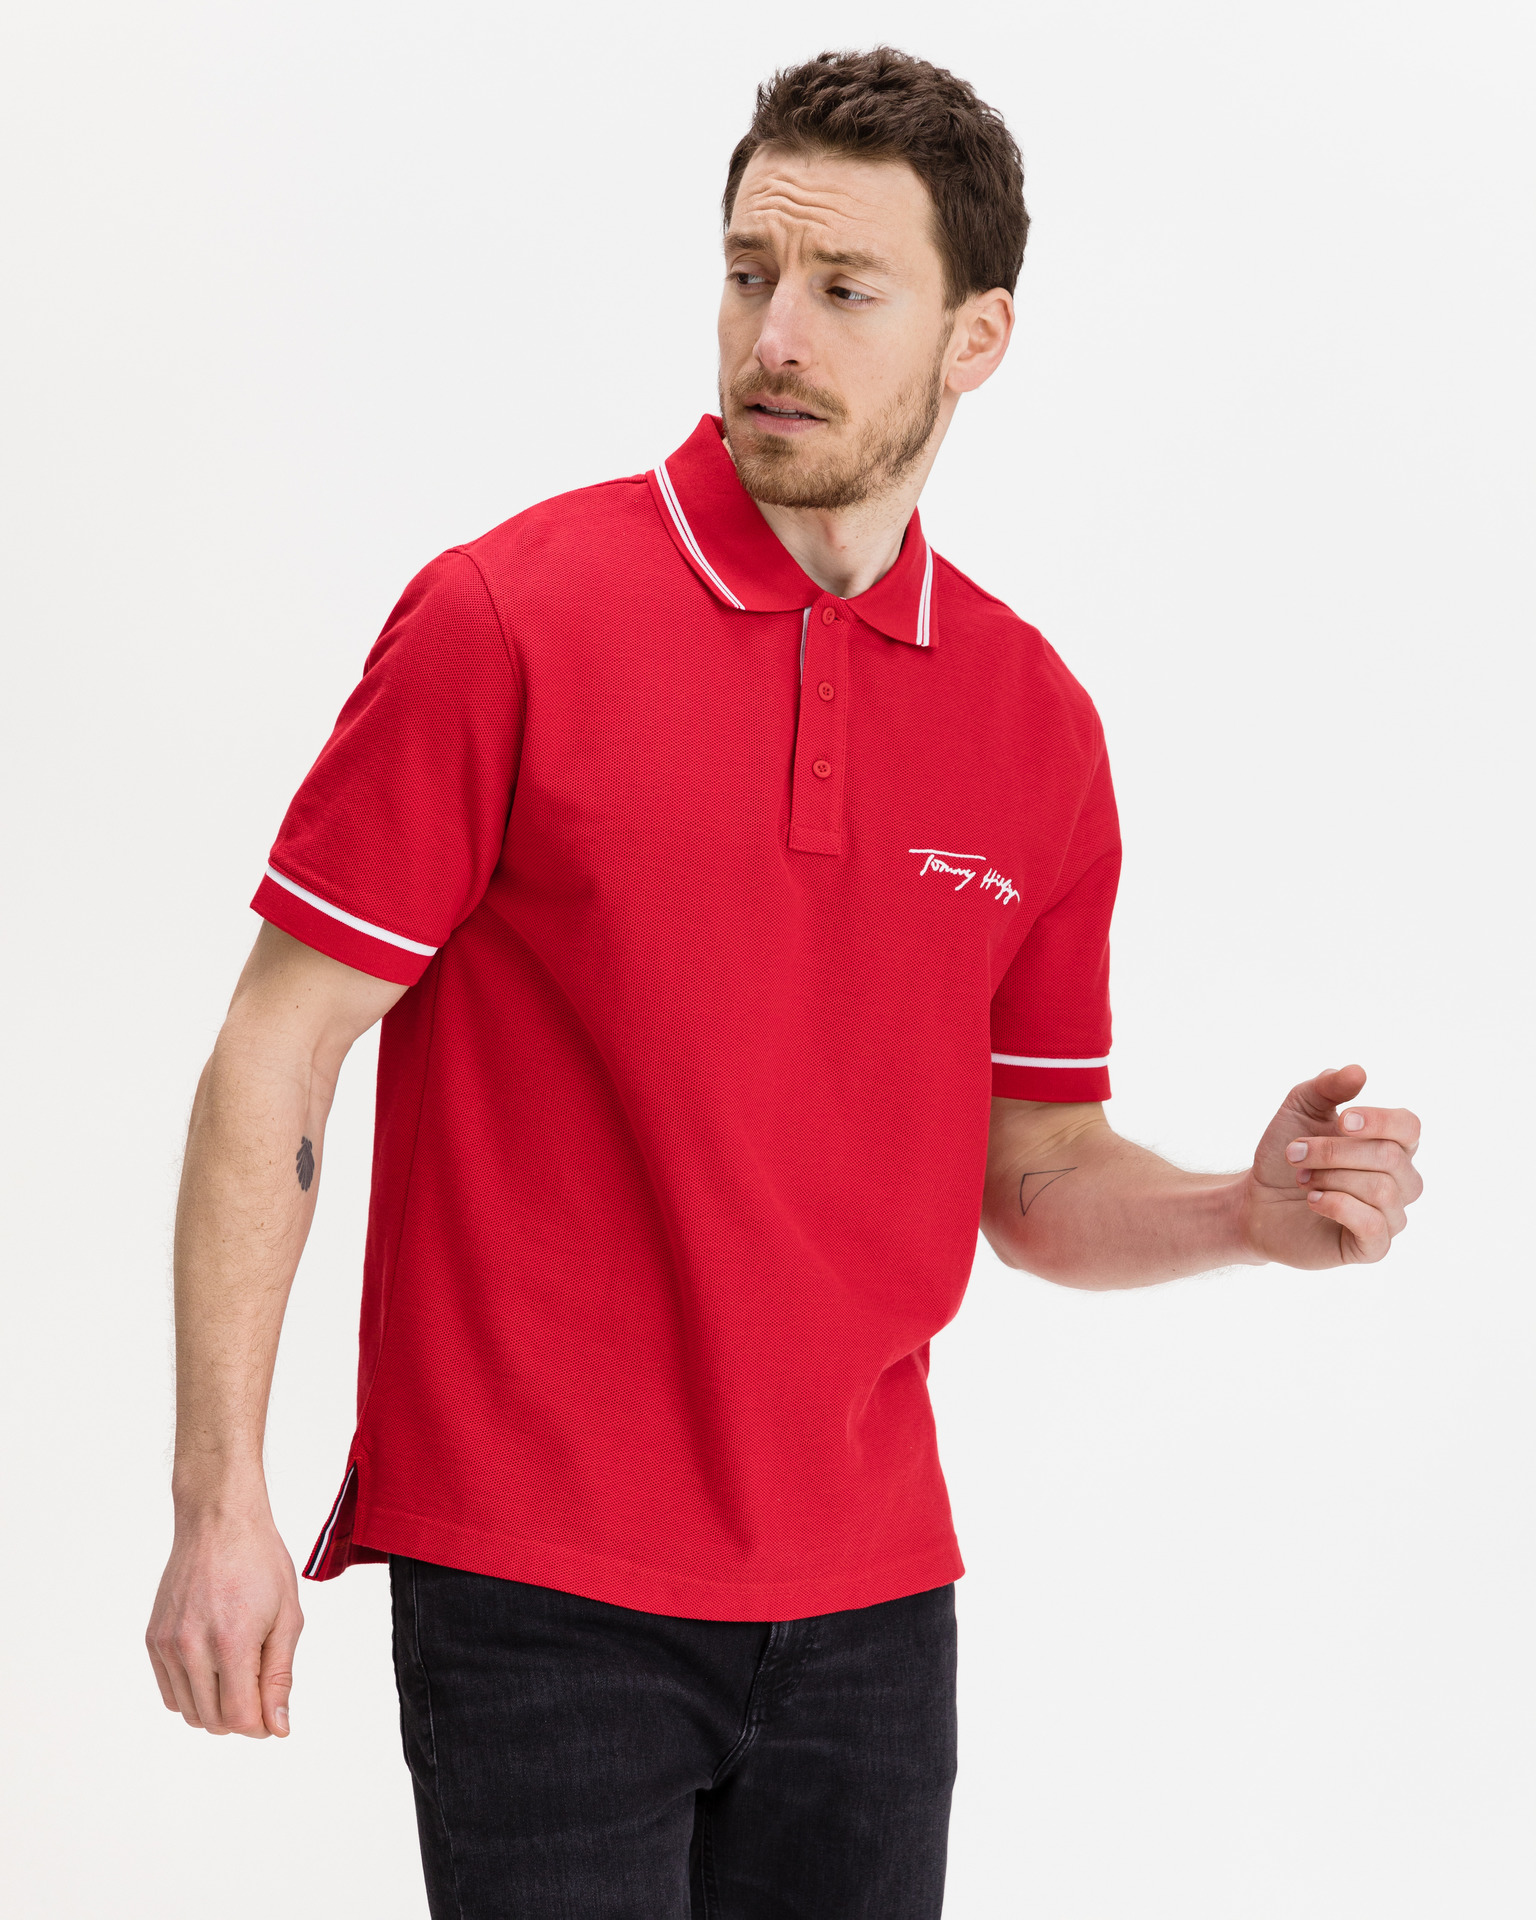 Locomotief College stad Tommy Hilfiger - Tipped Signature Polo Shirt Bibloo.com